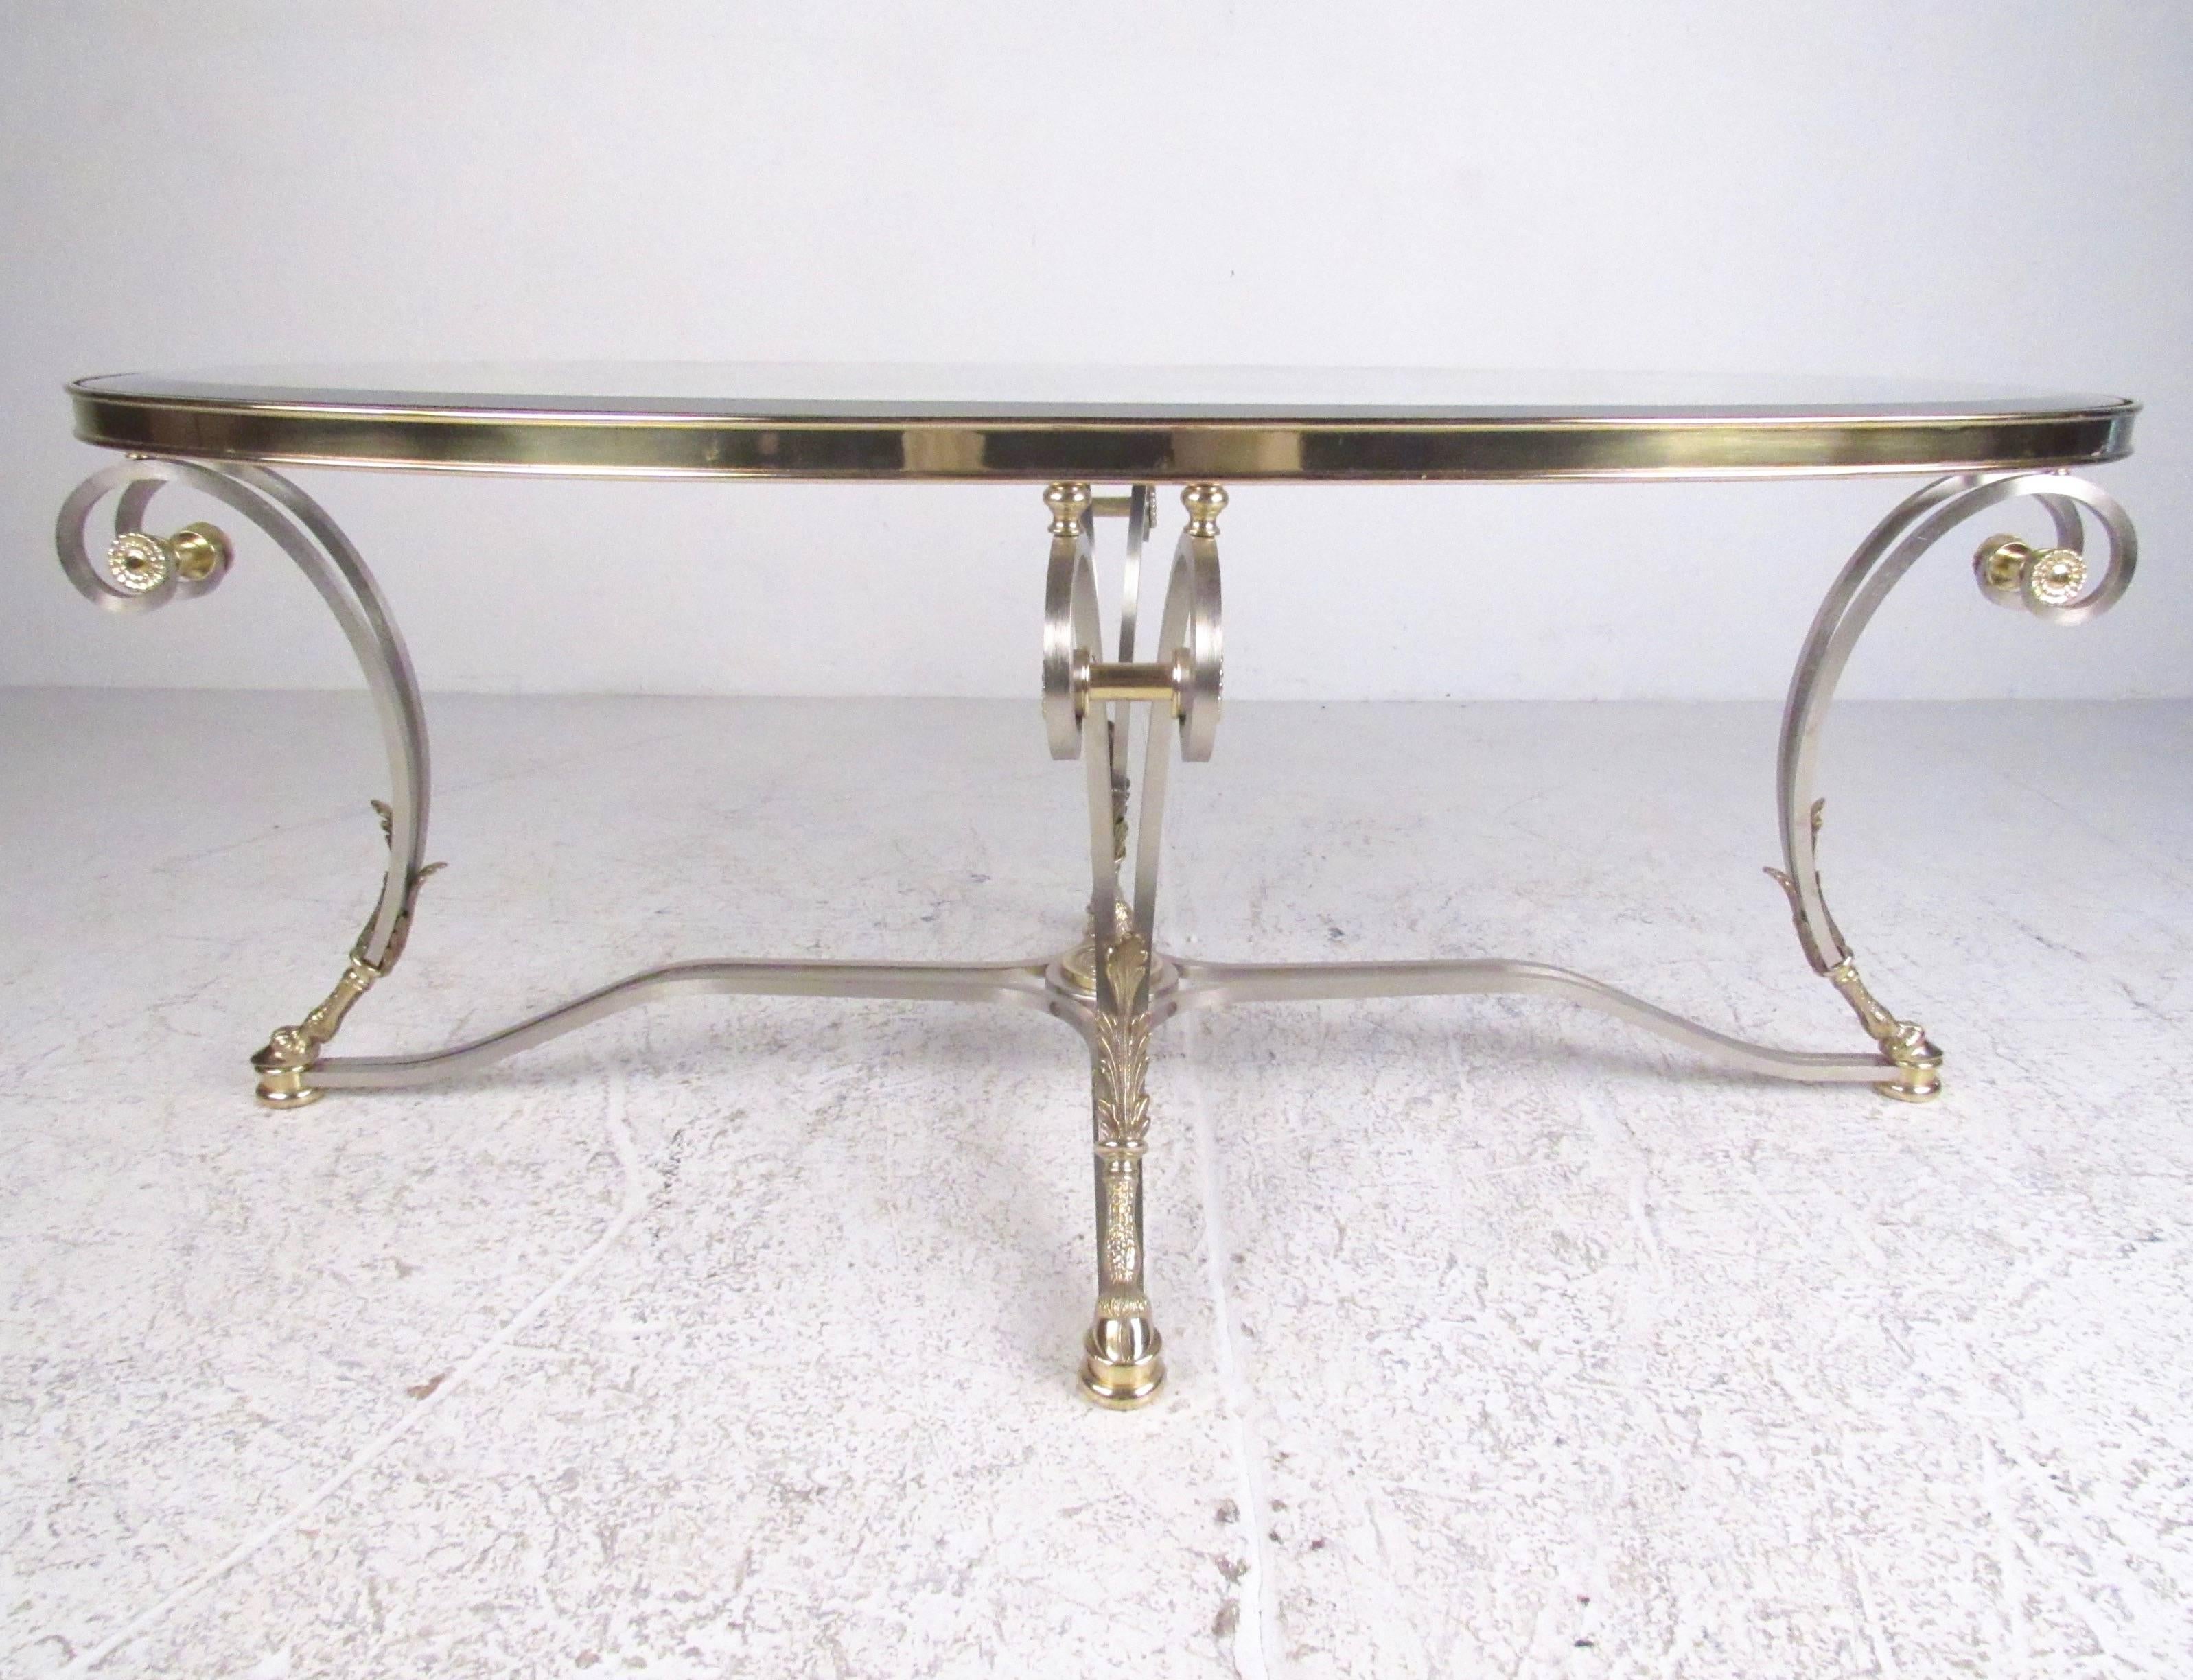 This stylish vintage modern coffee table features brushed steel finish with ornate brass details. This Regency style oval coffee table is the perfect for home or business seating area, please confirm item location (NY or NJ).